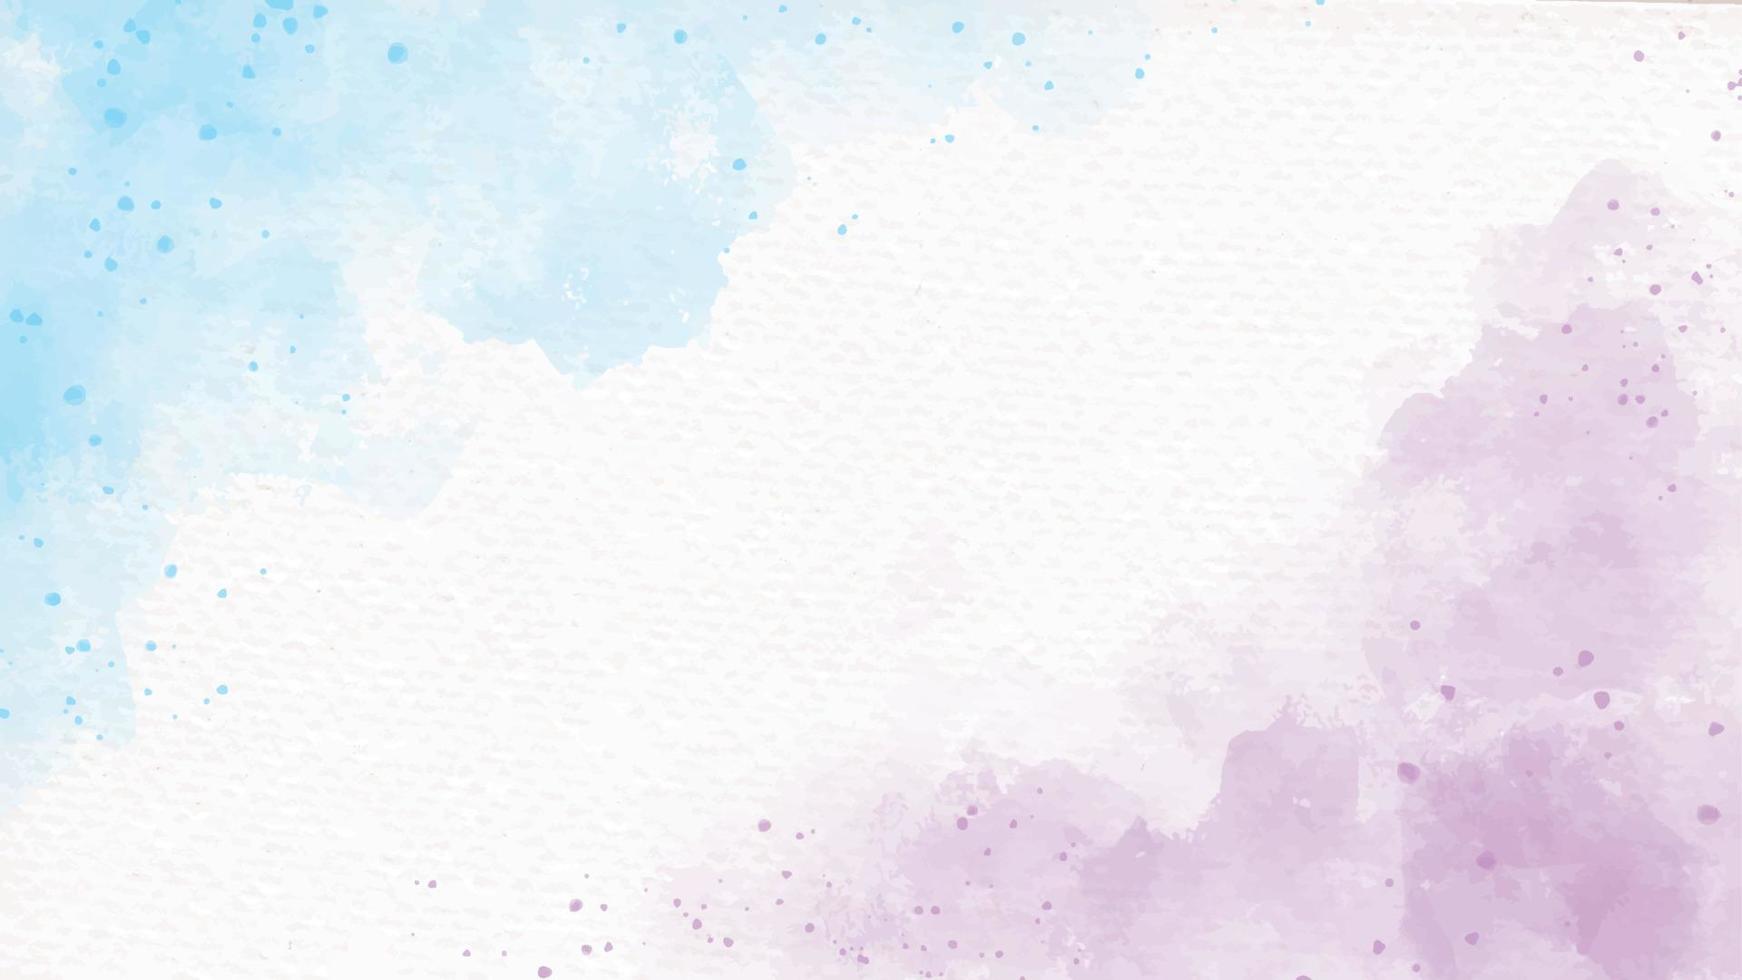 blue and violet rainbow pastel unicorn girly watercolor on paper abstract background vector